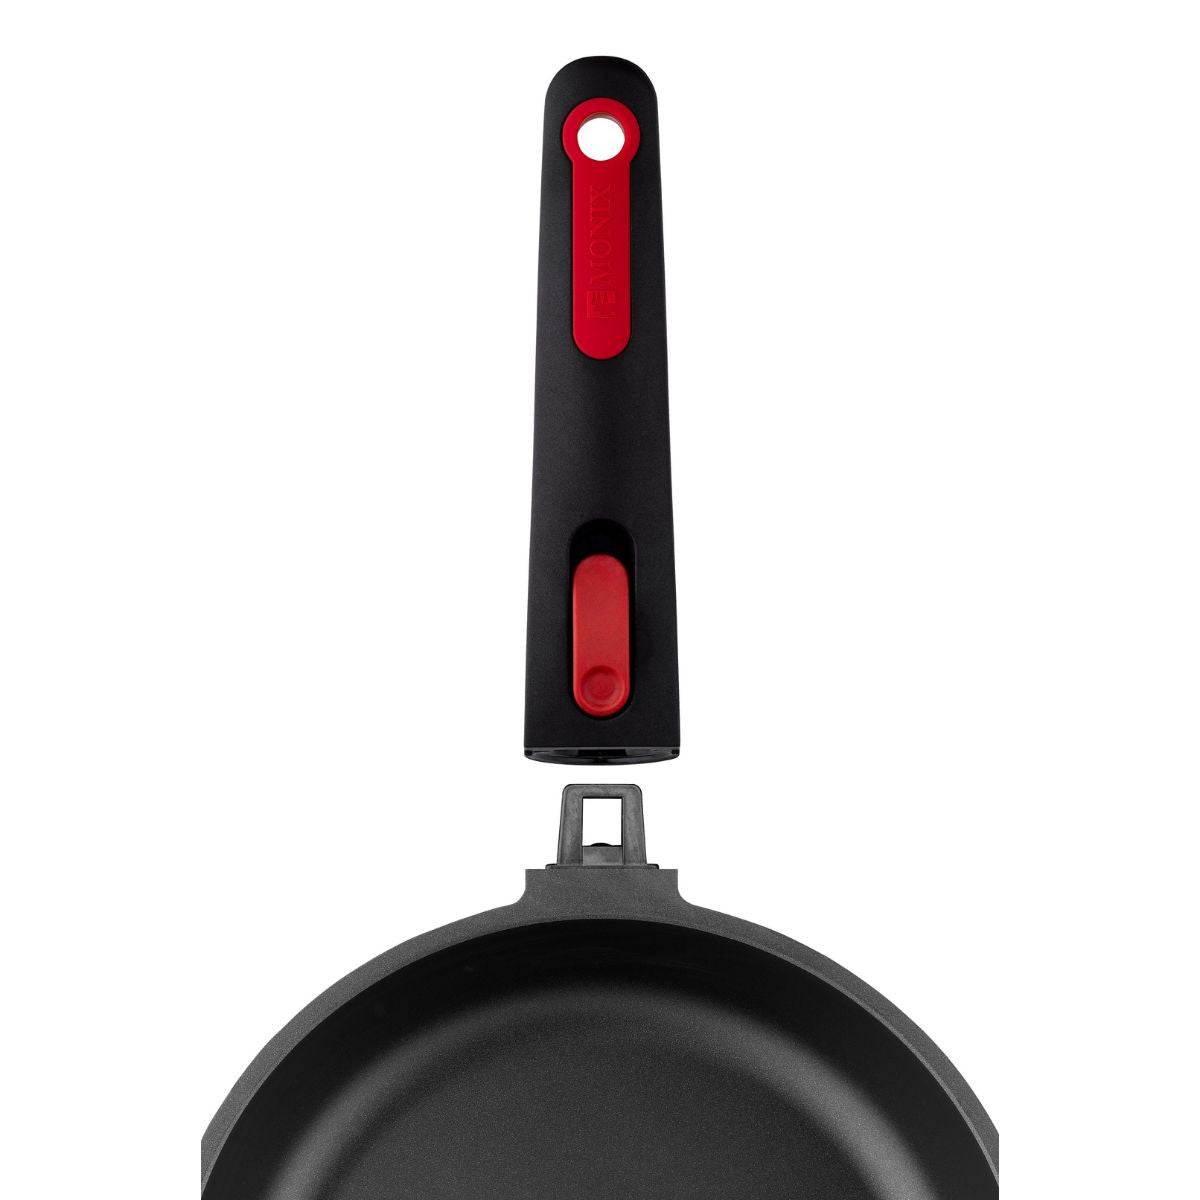 In&Out Frying Pan